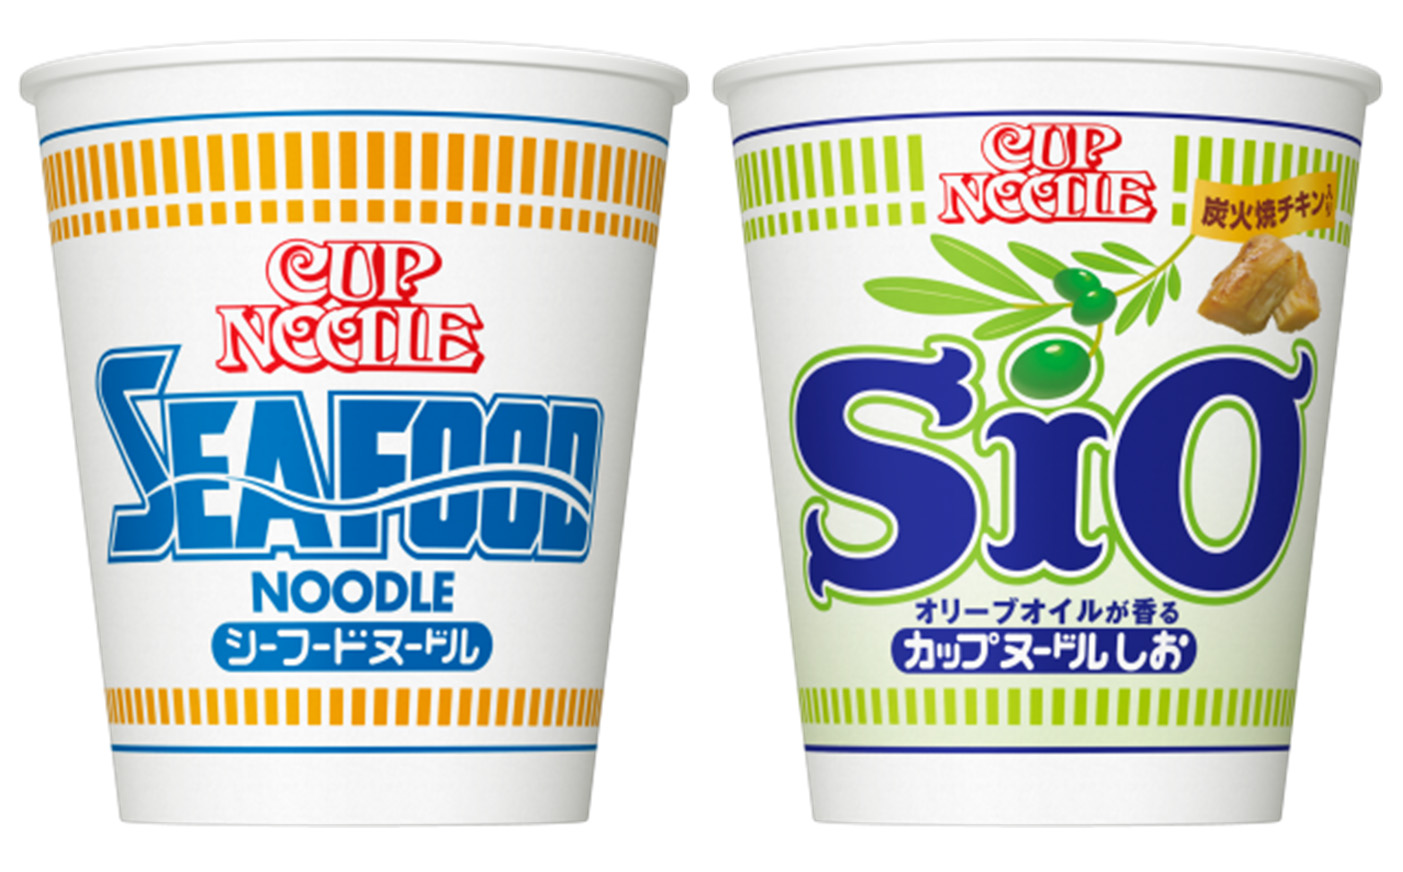 Nissin CUP NOODLE 日清 カップヌードル - World famous popular instant noodles